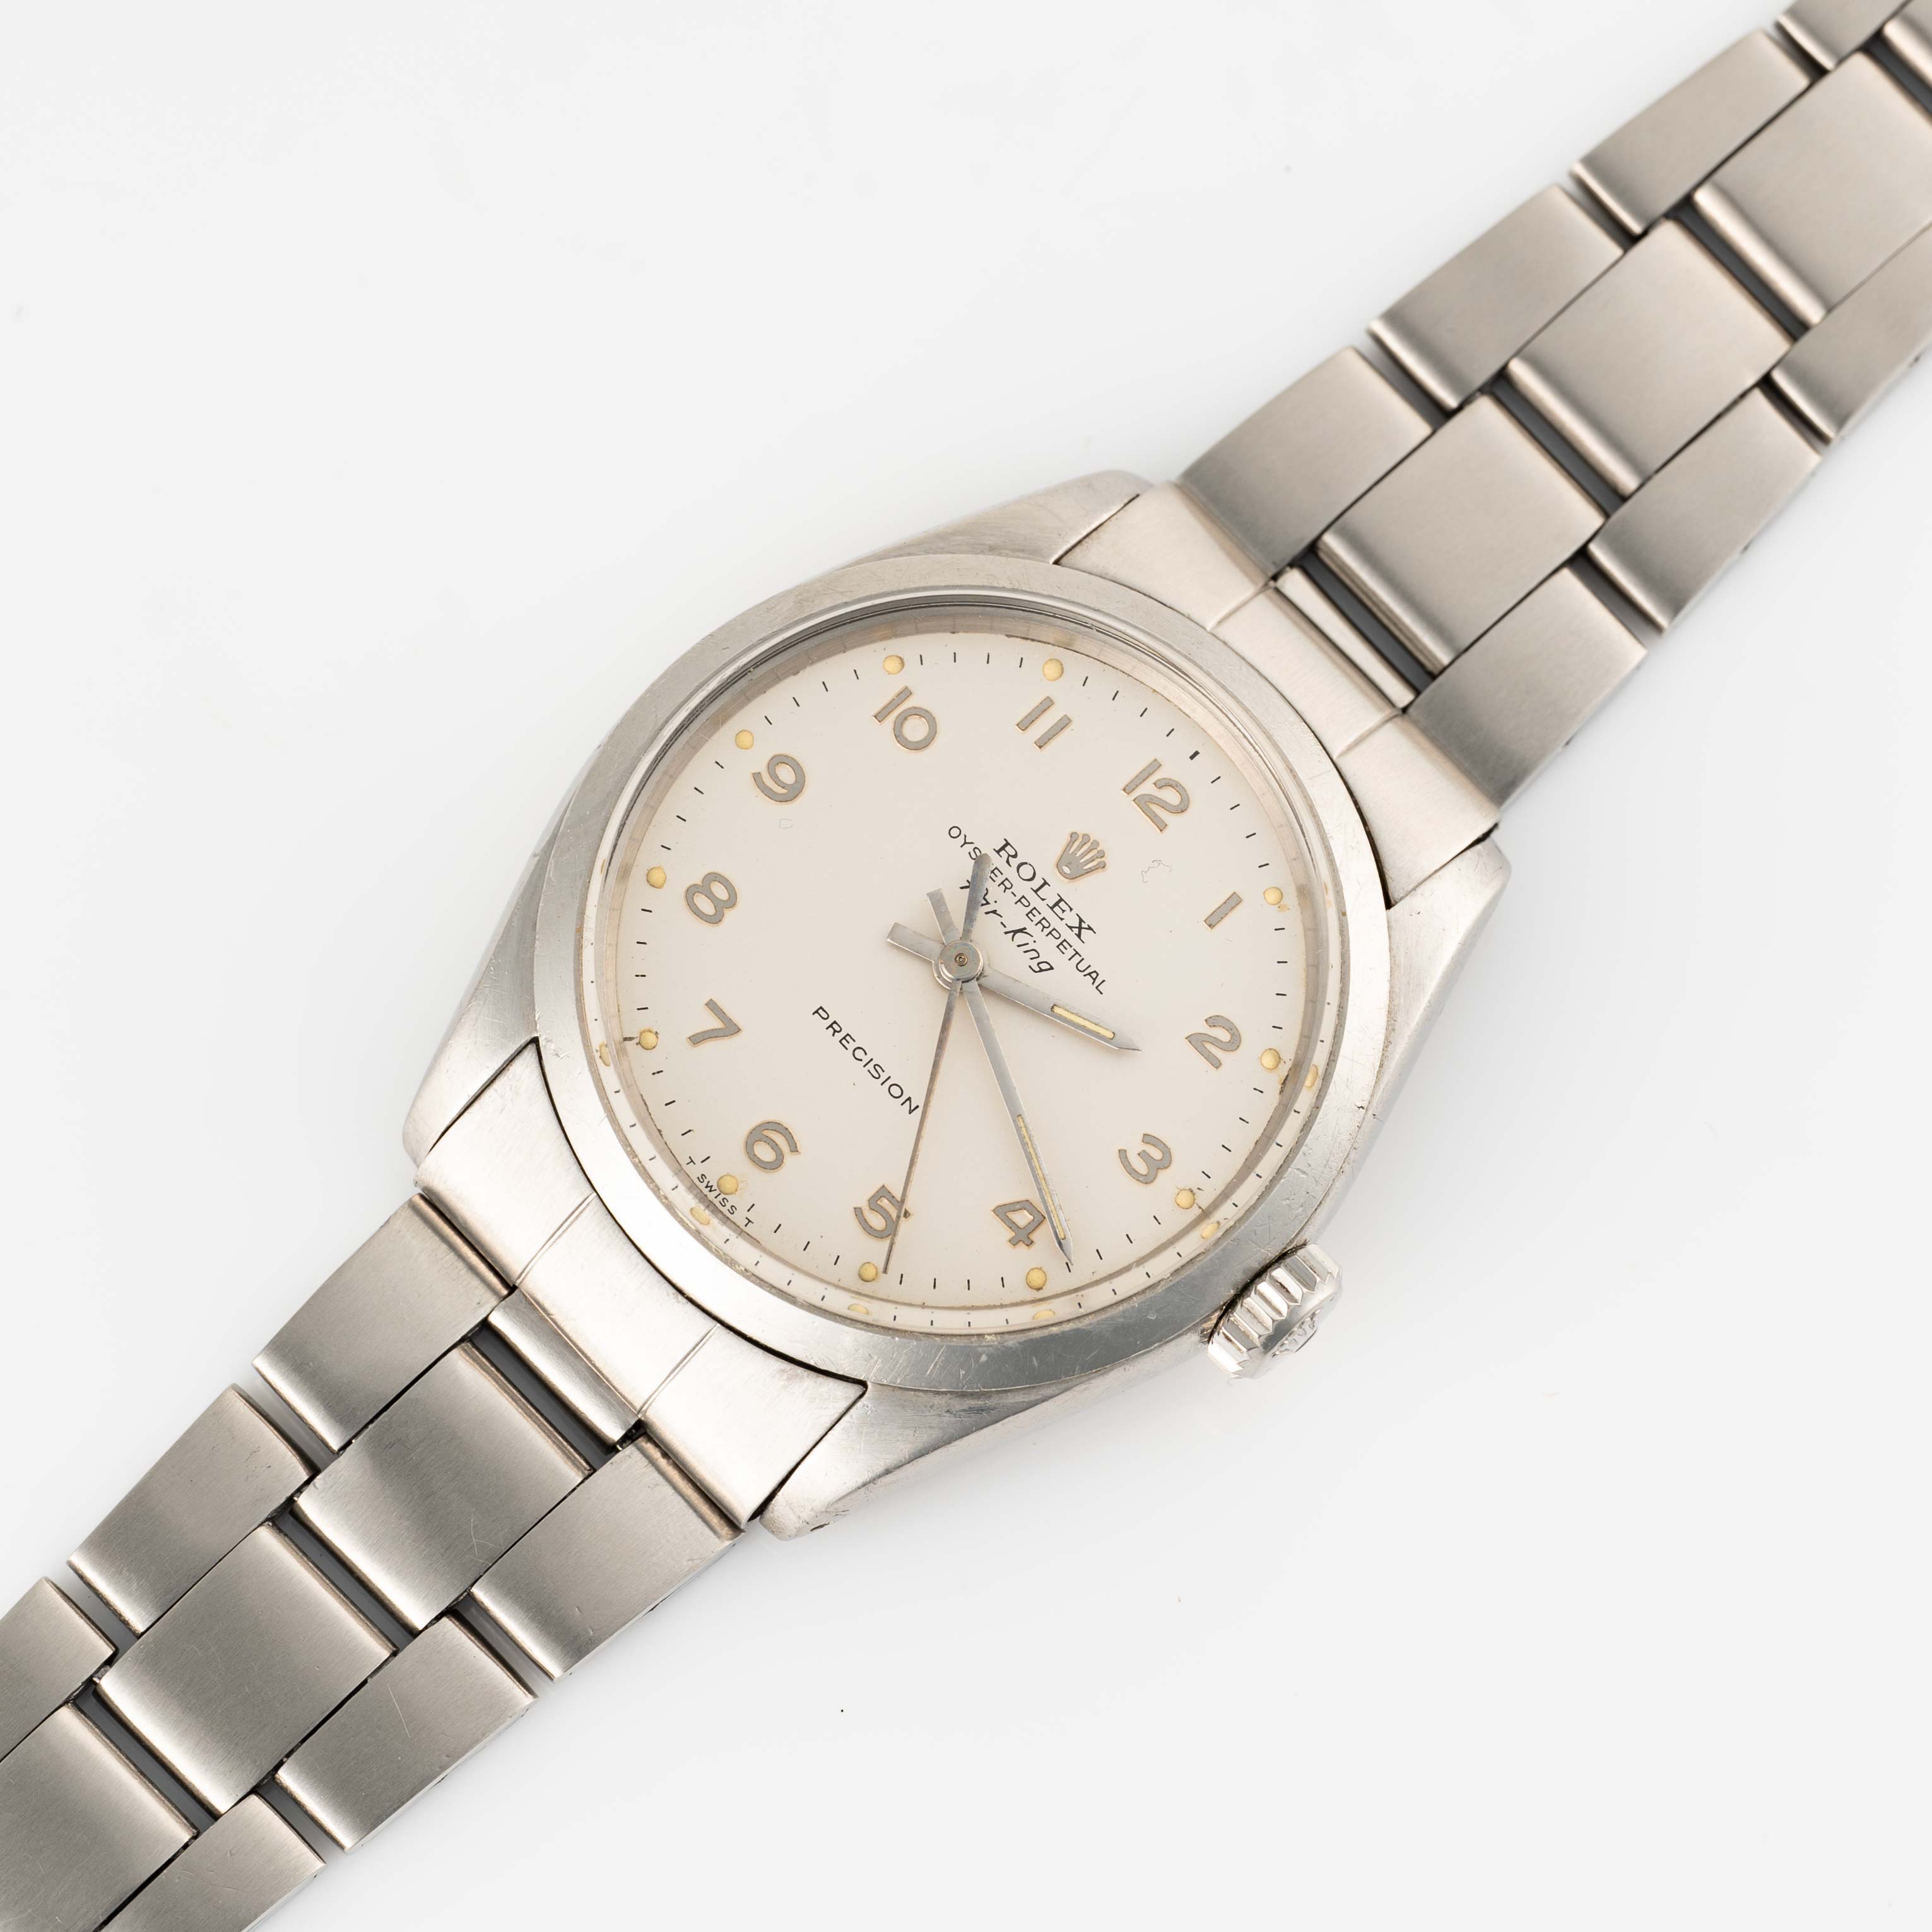 A GENTLEMAN'S SIZE STAINLESS STEEL ROLEX OYSTER PERPETUAL AIR KING PRECISION BRACELET WATCH CIRCA - Image 4 of 9